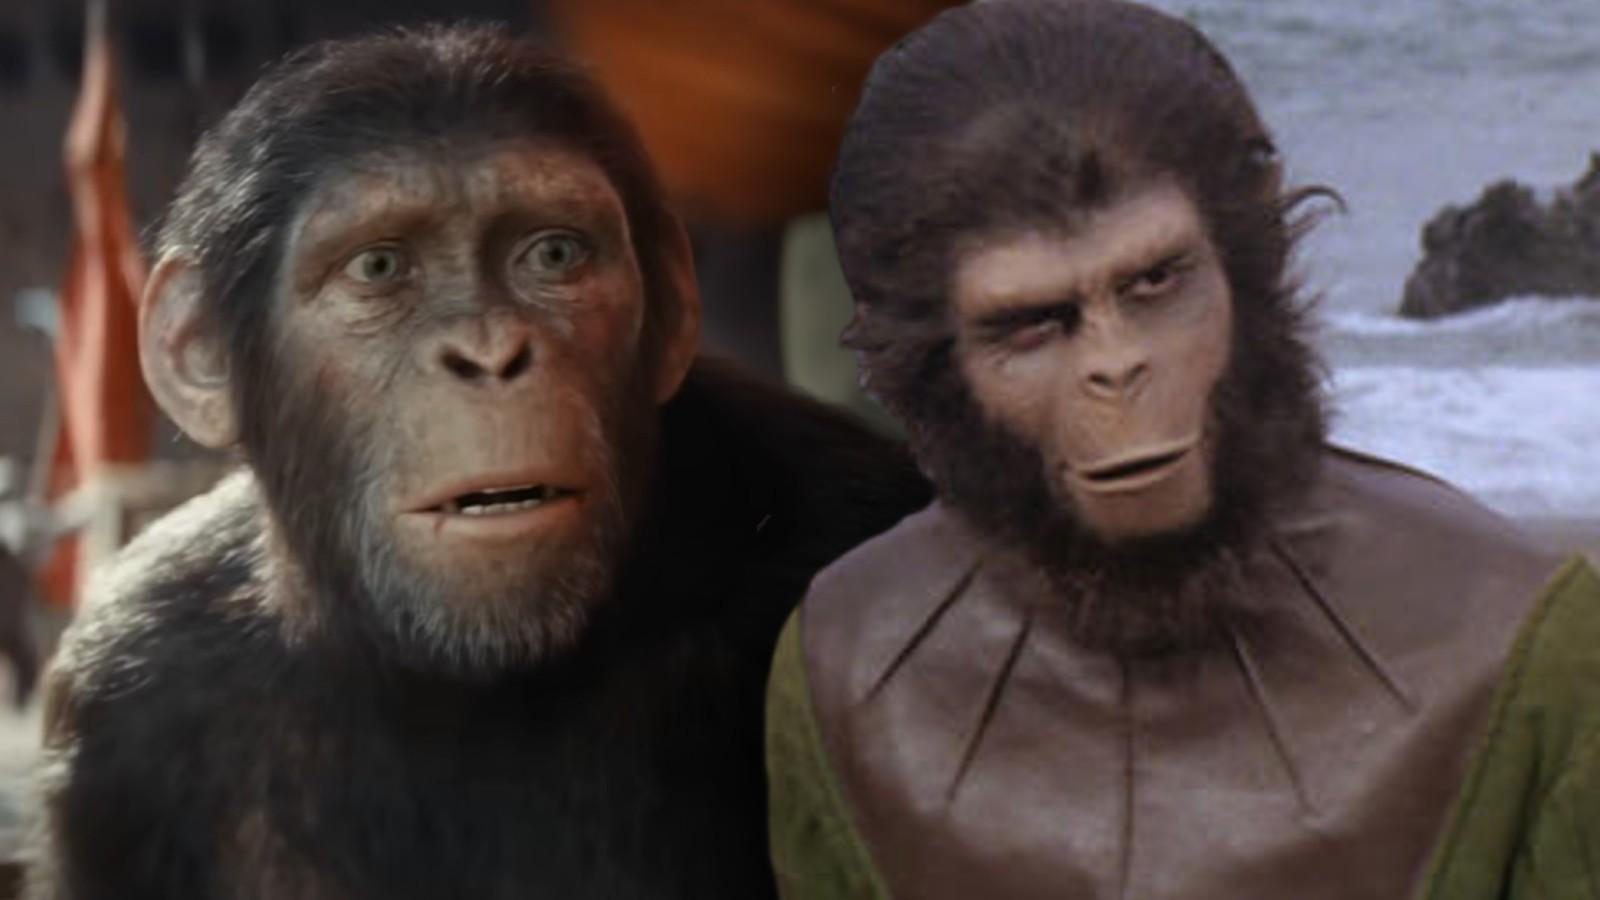 Noa in Kingdom of the Planet of the Apes and Cornelius in Planet of the Apes